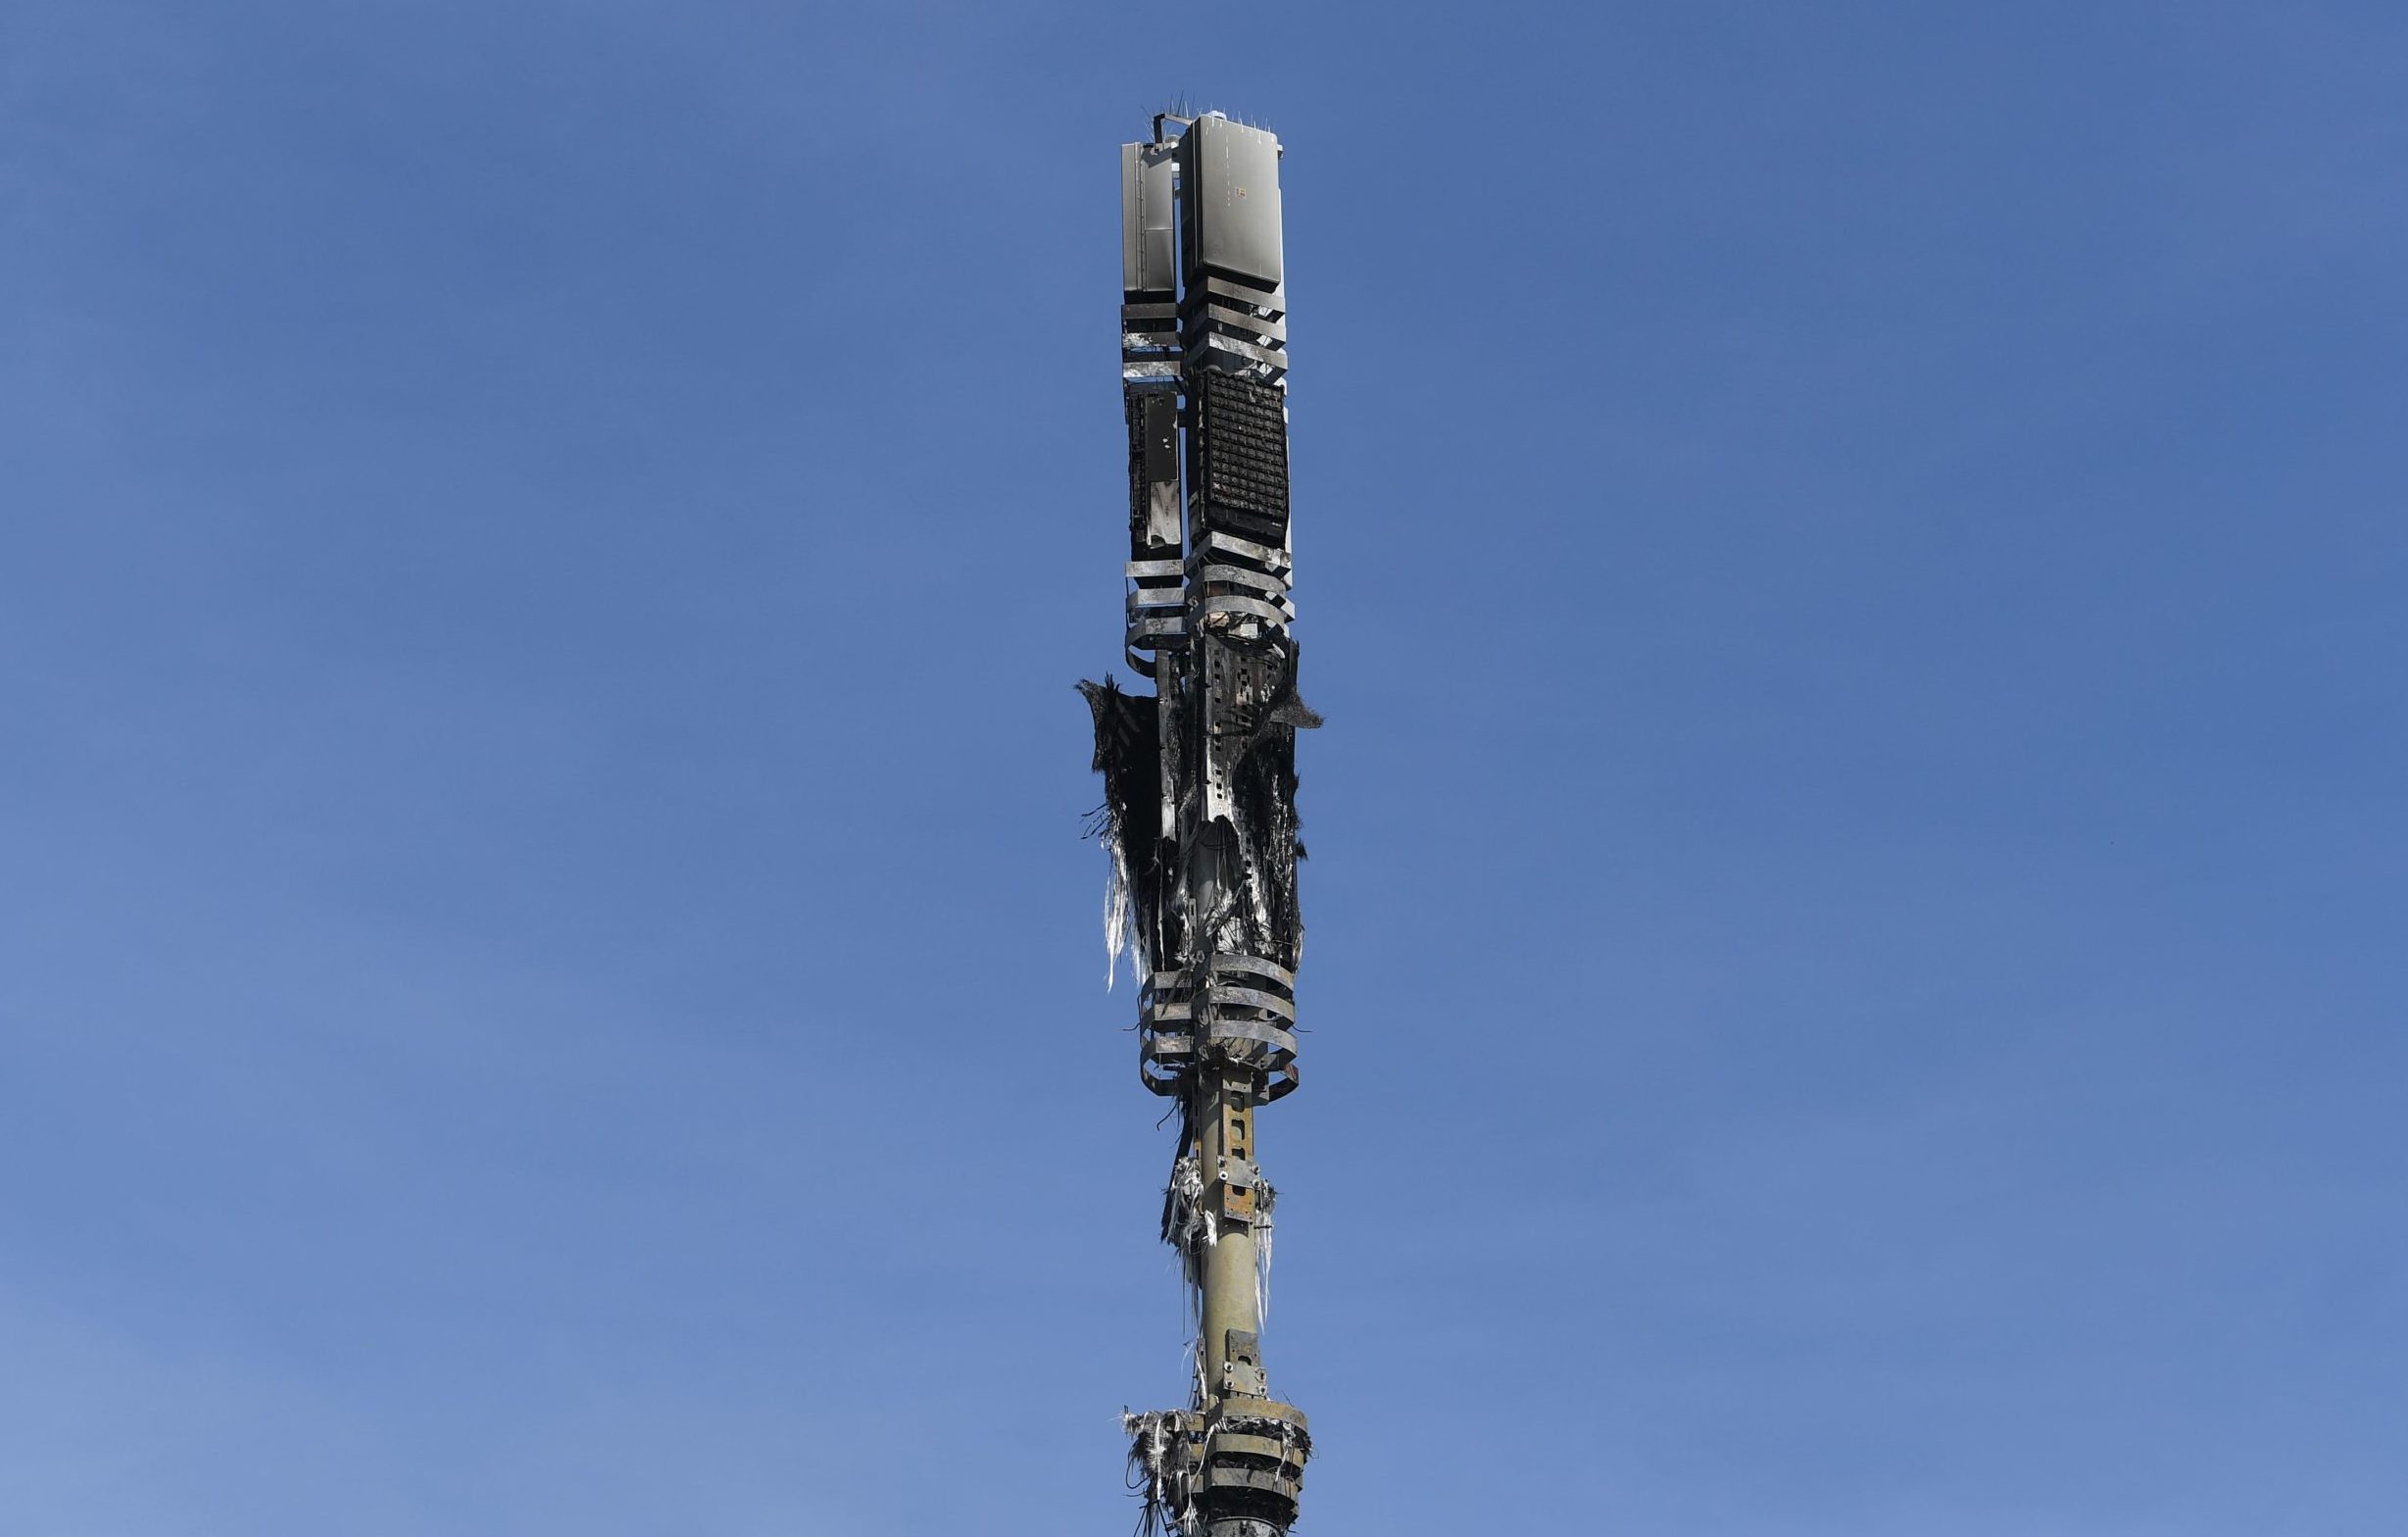 A burned down mobile phone mast in London